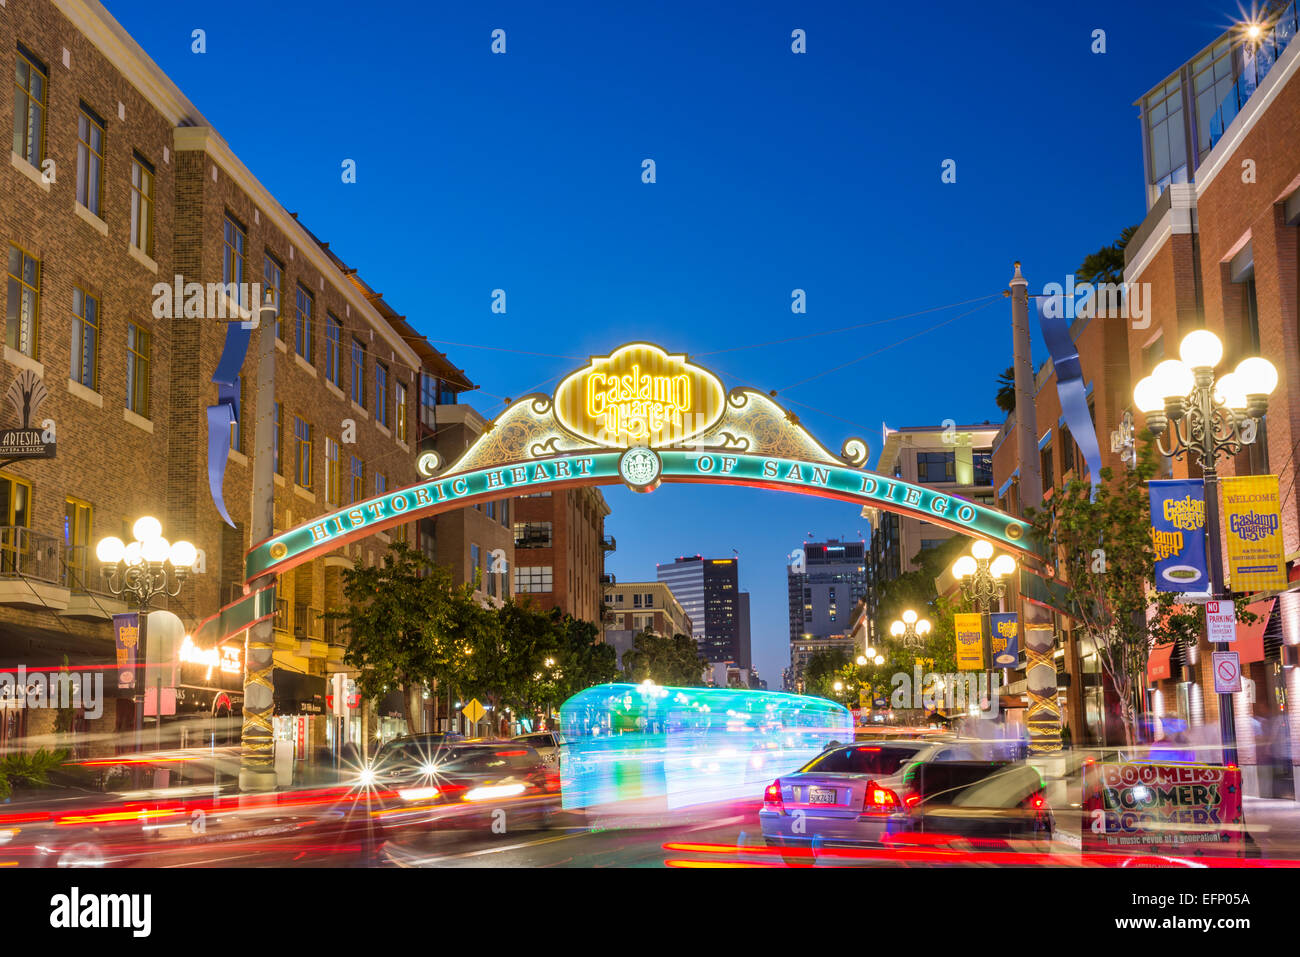 The Gaslamp Quarter sign illuminated at night. Looking down 5th Avenue. San Diego, California, United States. Stock Photo